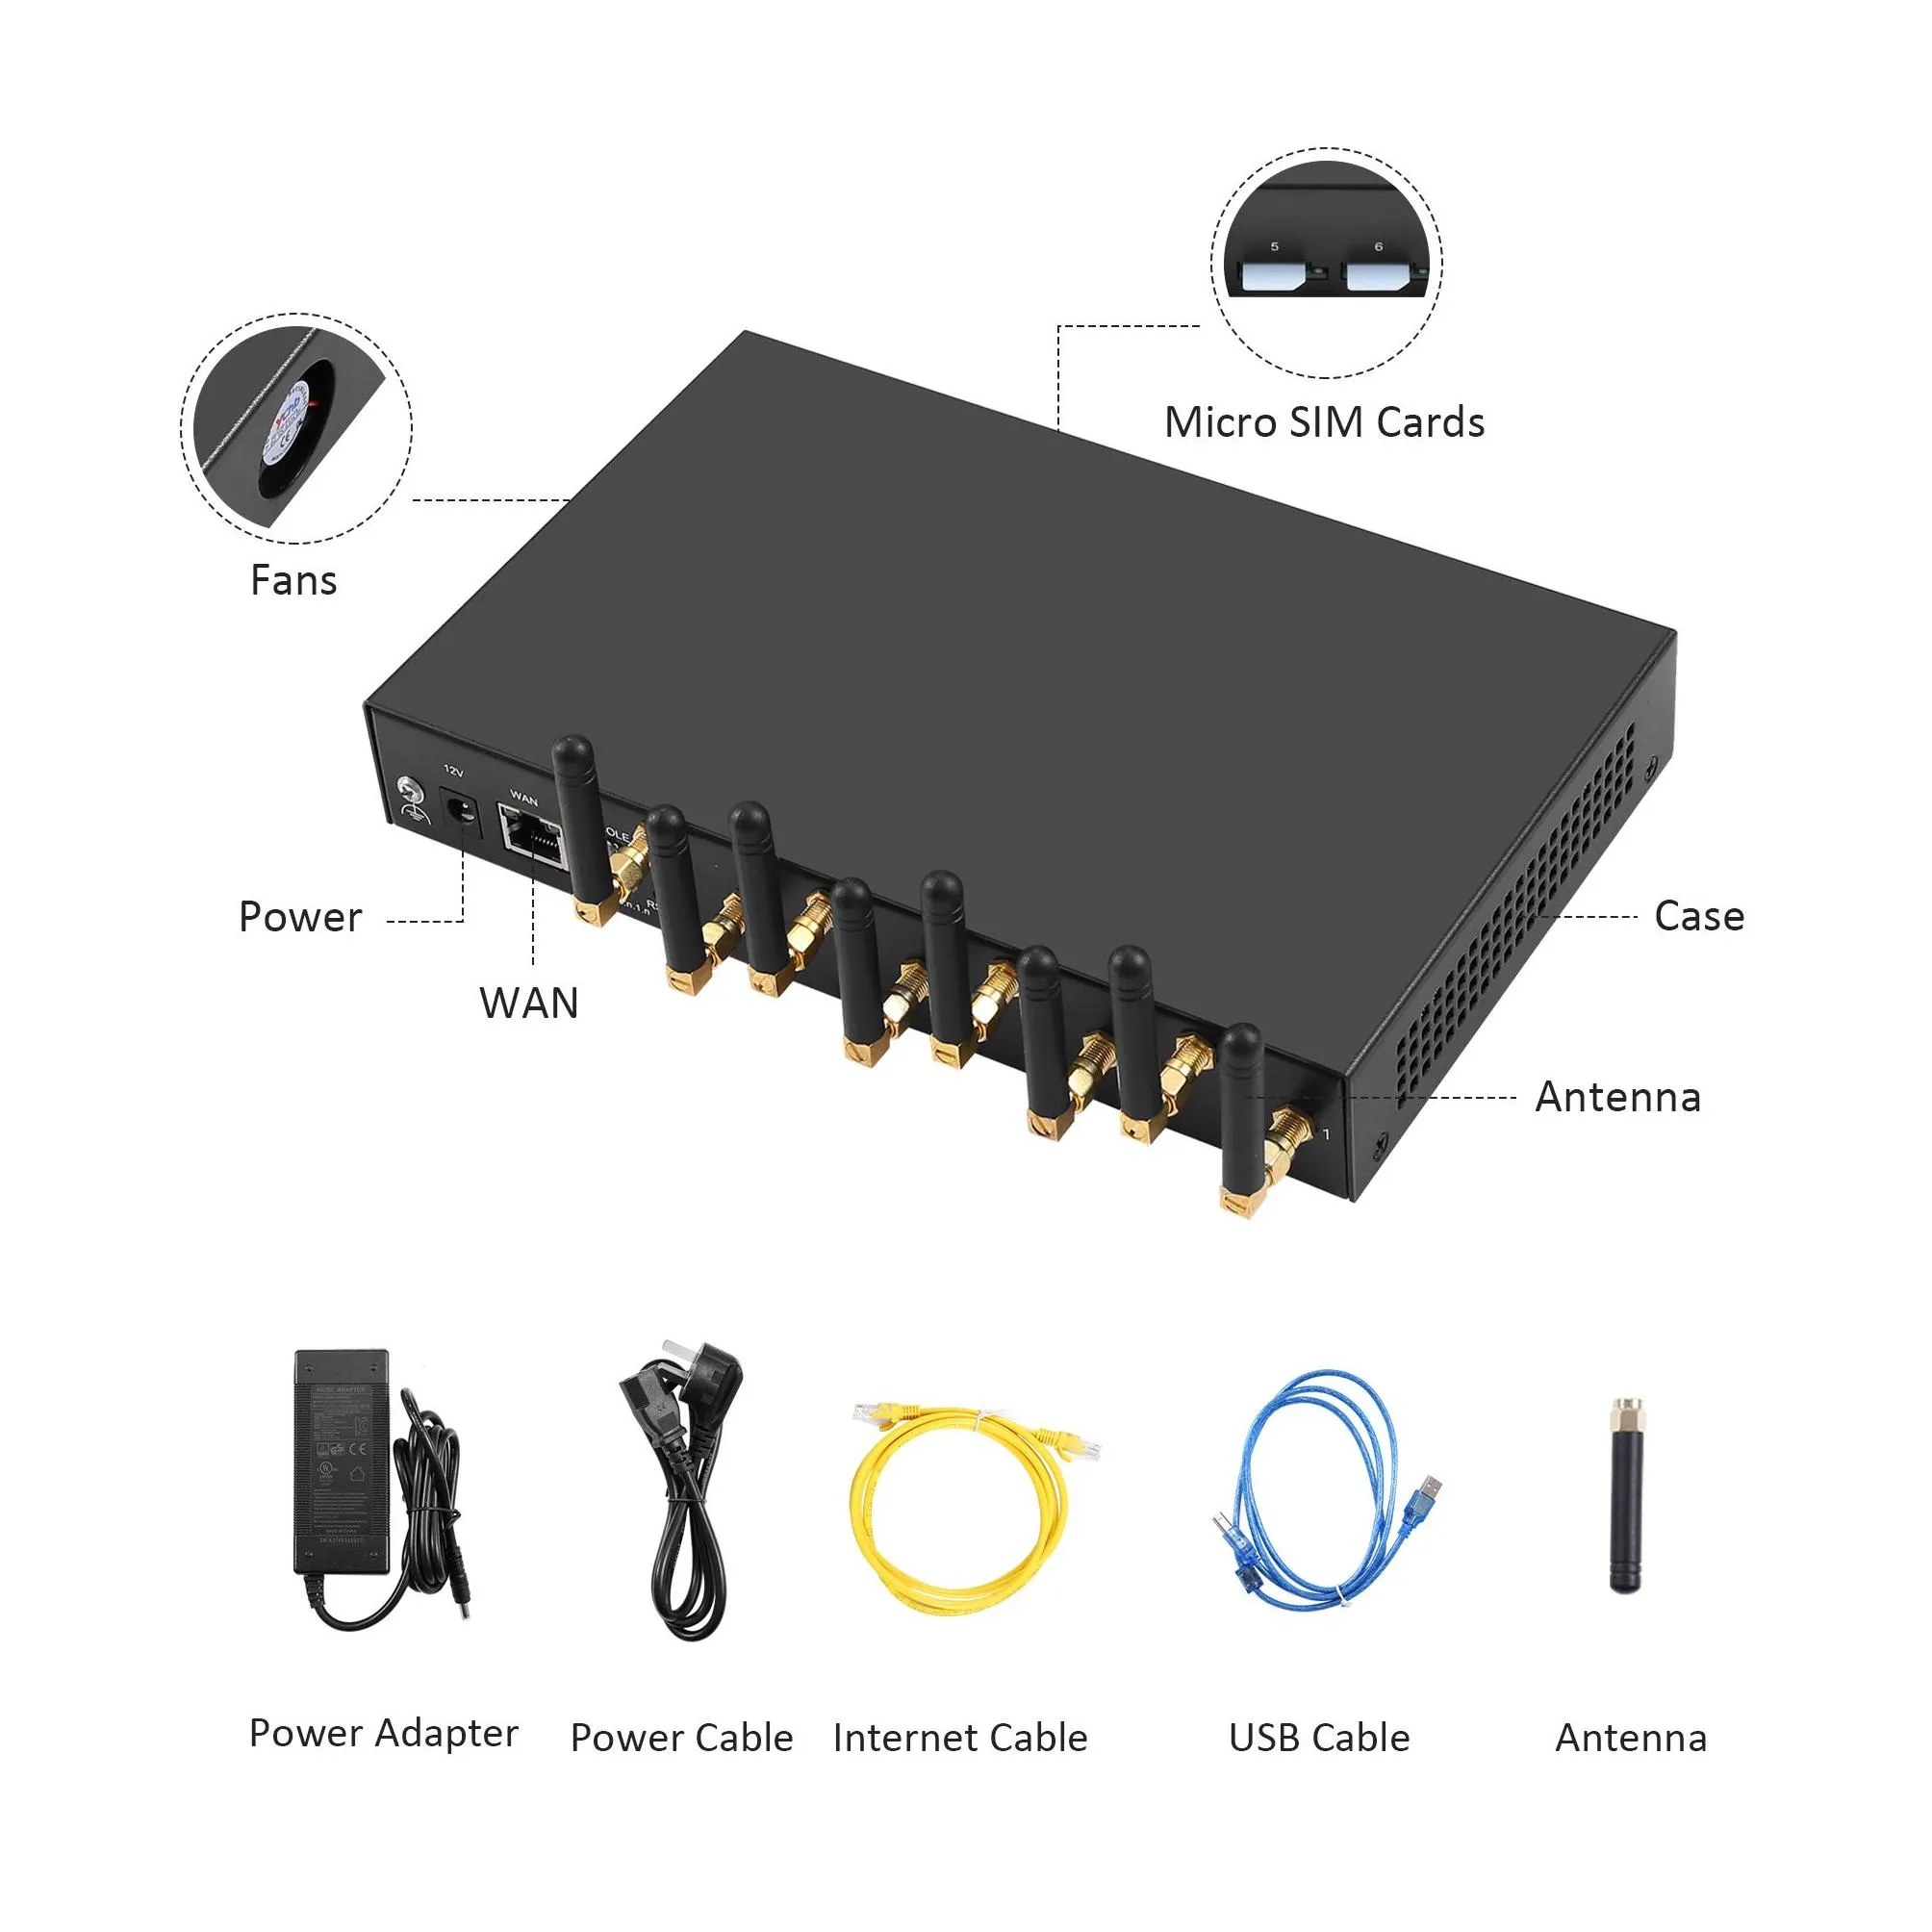 4G Lte 8 Antenna Channel High Gain Signal Wireless Modem Support SMPP Http API Data Analysis And SMS Notification System